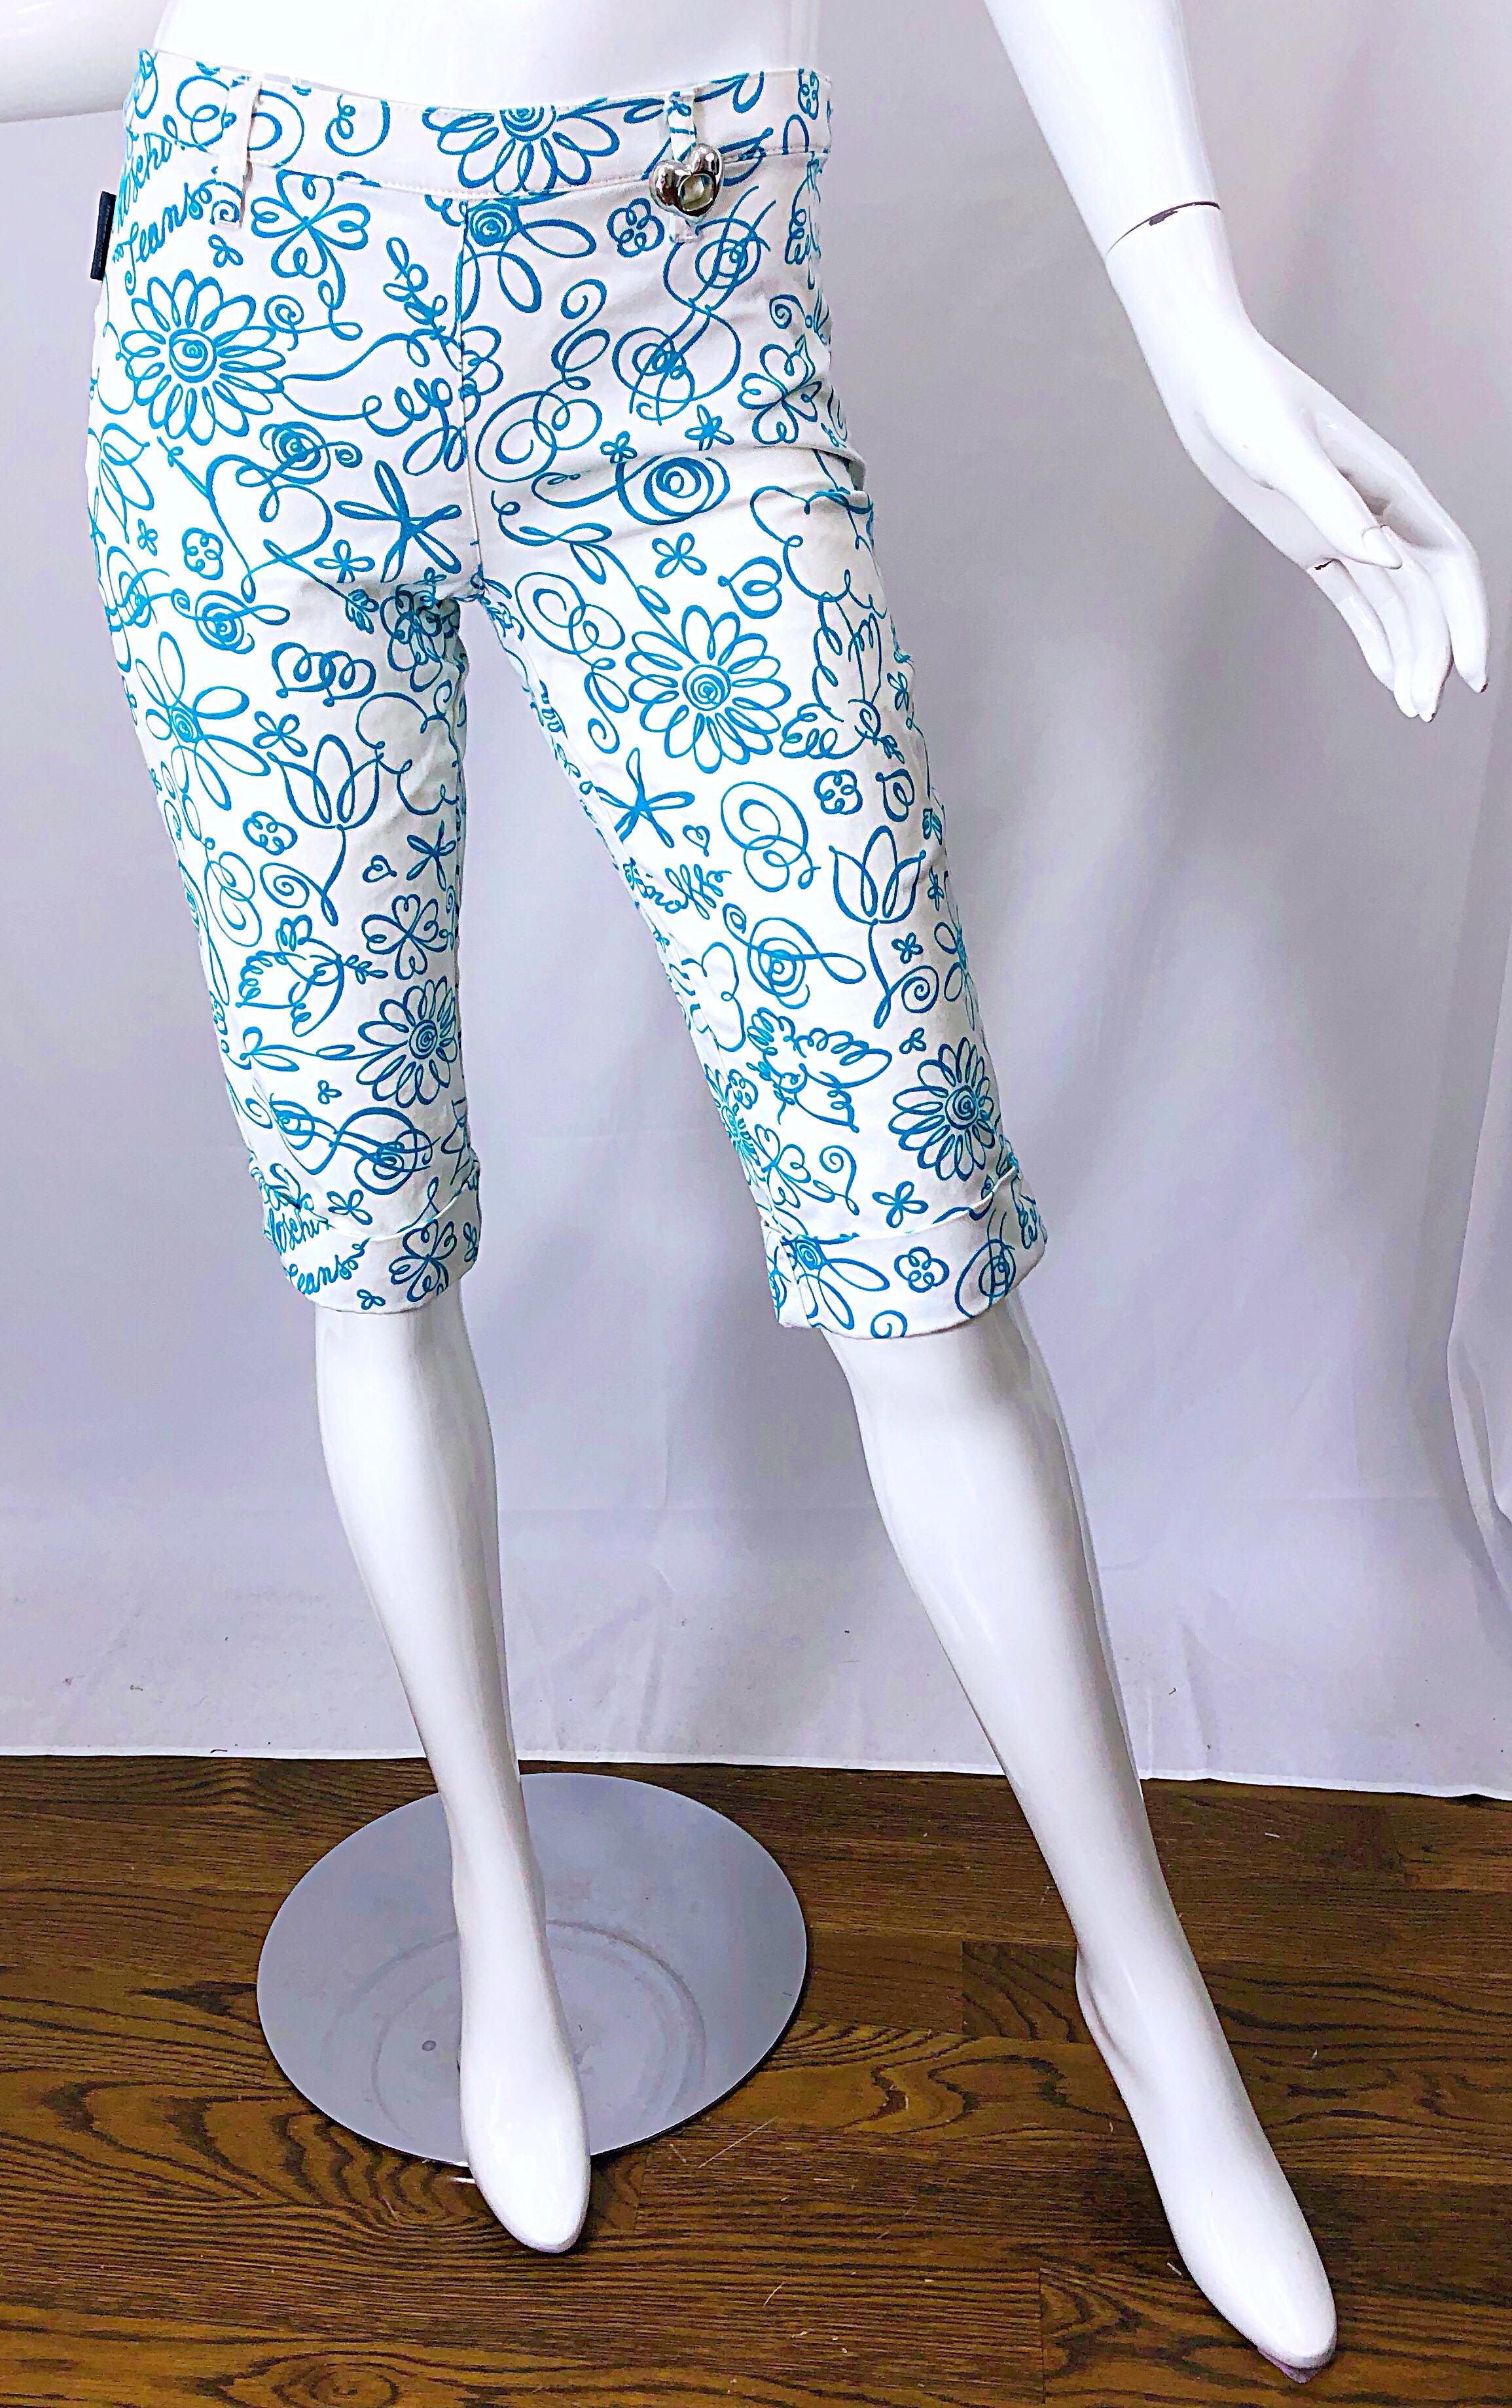 Stylish vintage MOSCHINO 1990s novelty print clam digger shorts! Features a white background with teal / turquoise blue graffiti prints throughout. Silver heart metal at left side belt loop. Fun prints of birds, hearts, stars, music notes, etc.